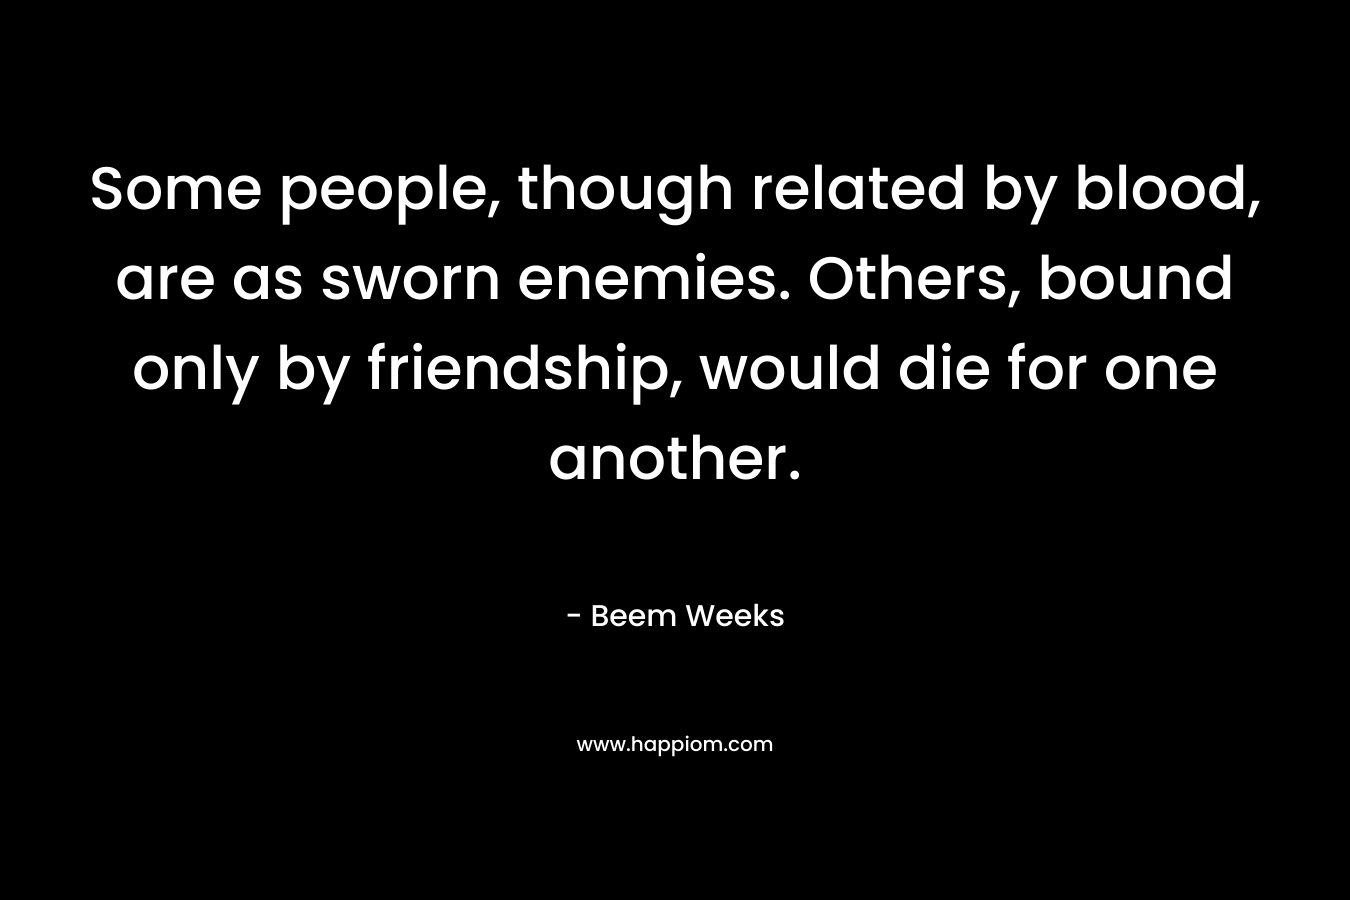 Some people, though related by blood, are as sworn enemies. Others, bound only by friendship, would die for one another. – Beem Weeks